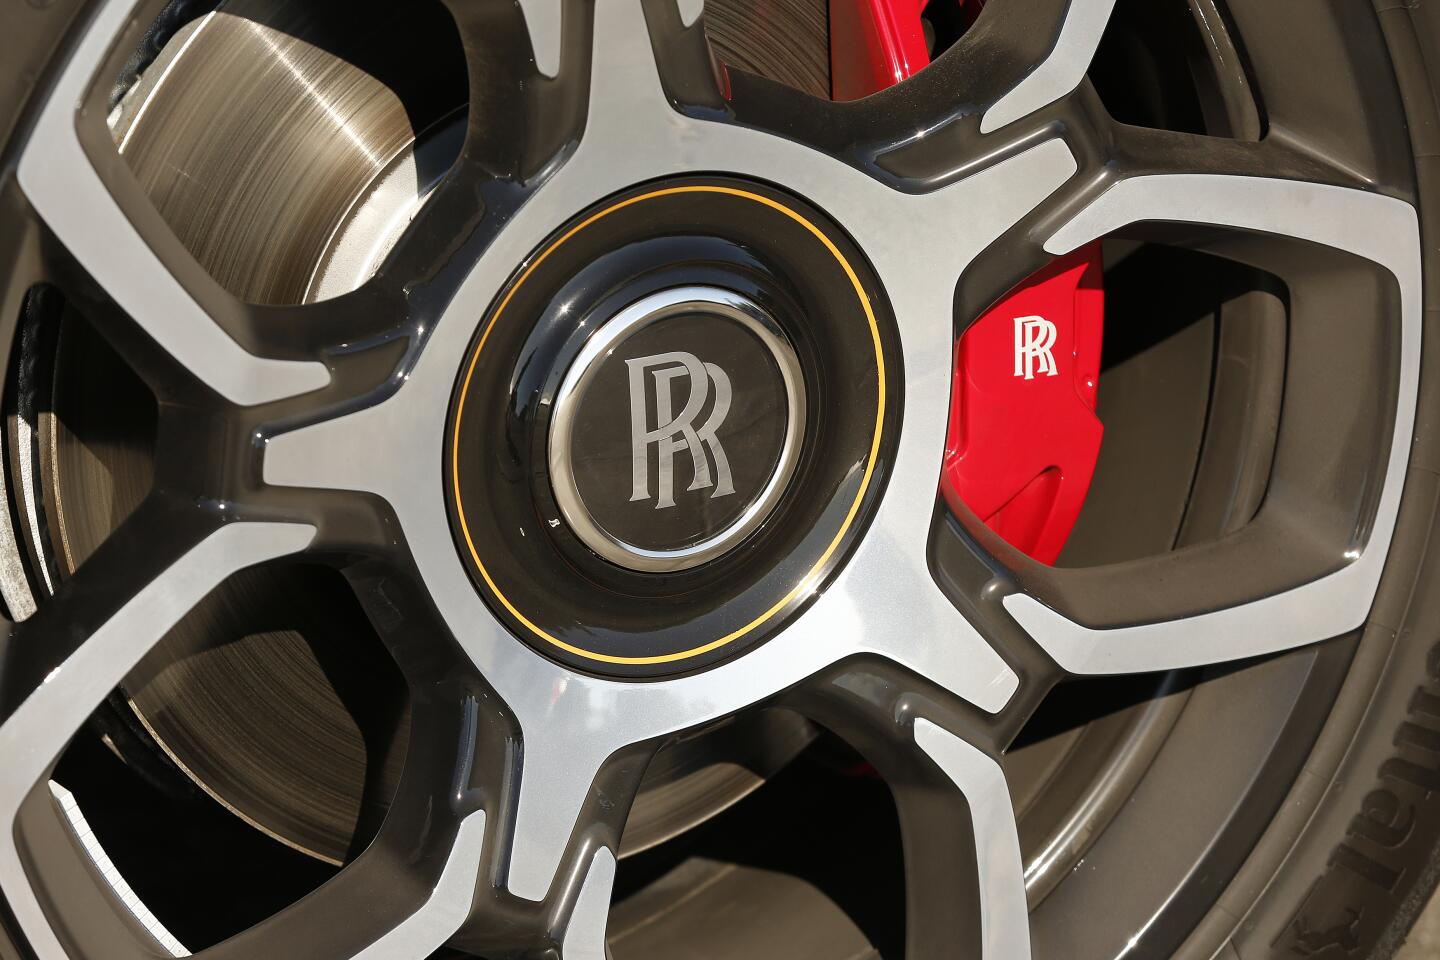 A tire with the Rolls-Royce logo in the center of the hubcap.